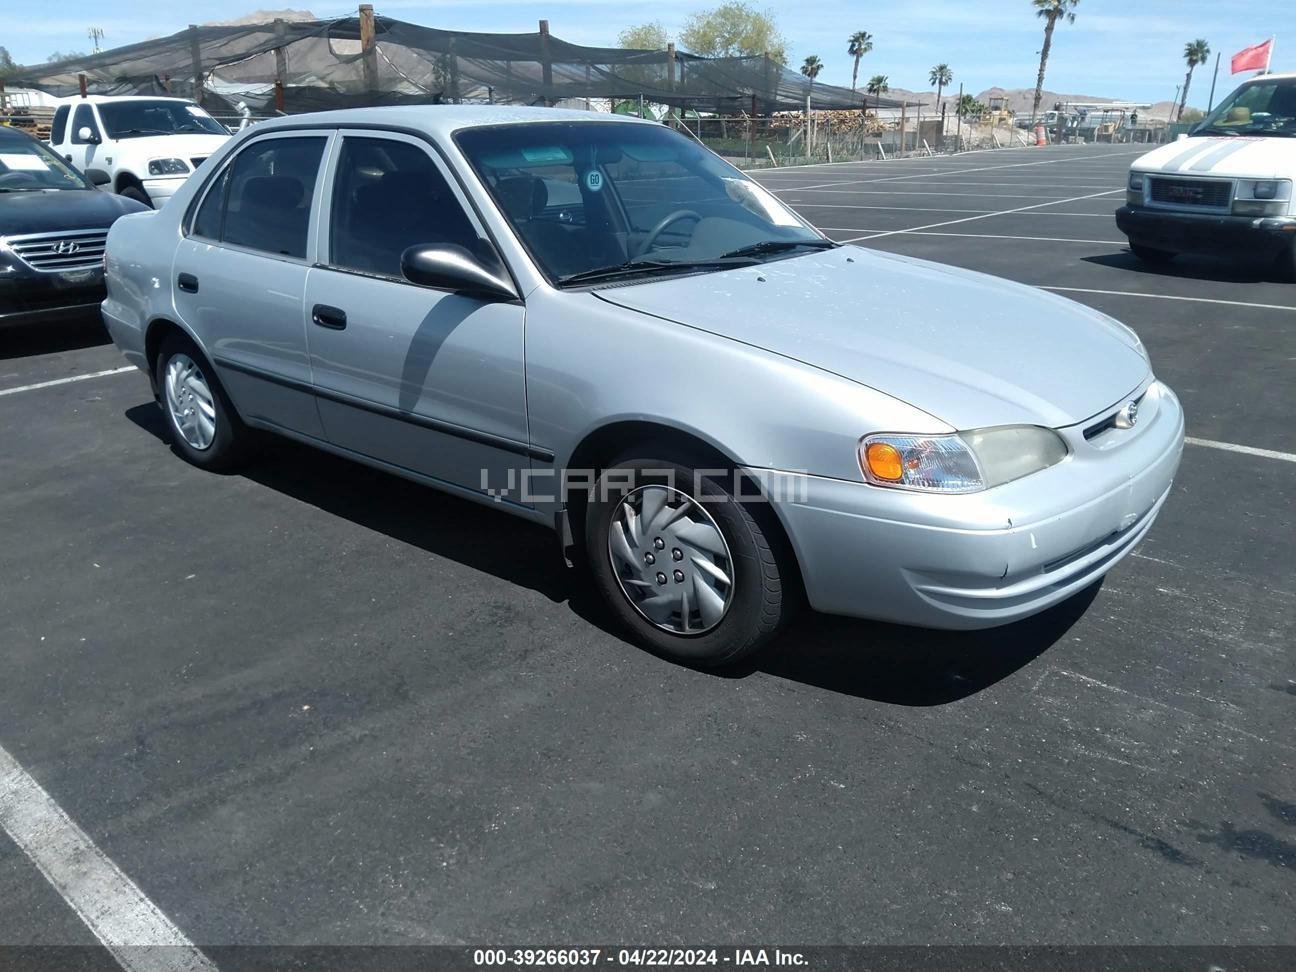 VIN: 2T1BR12EXYC382164 - toyota corolla